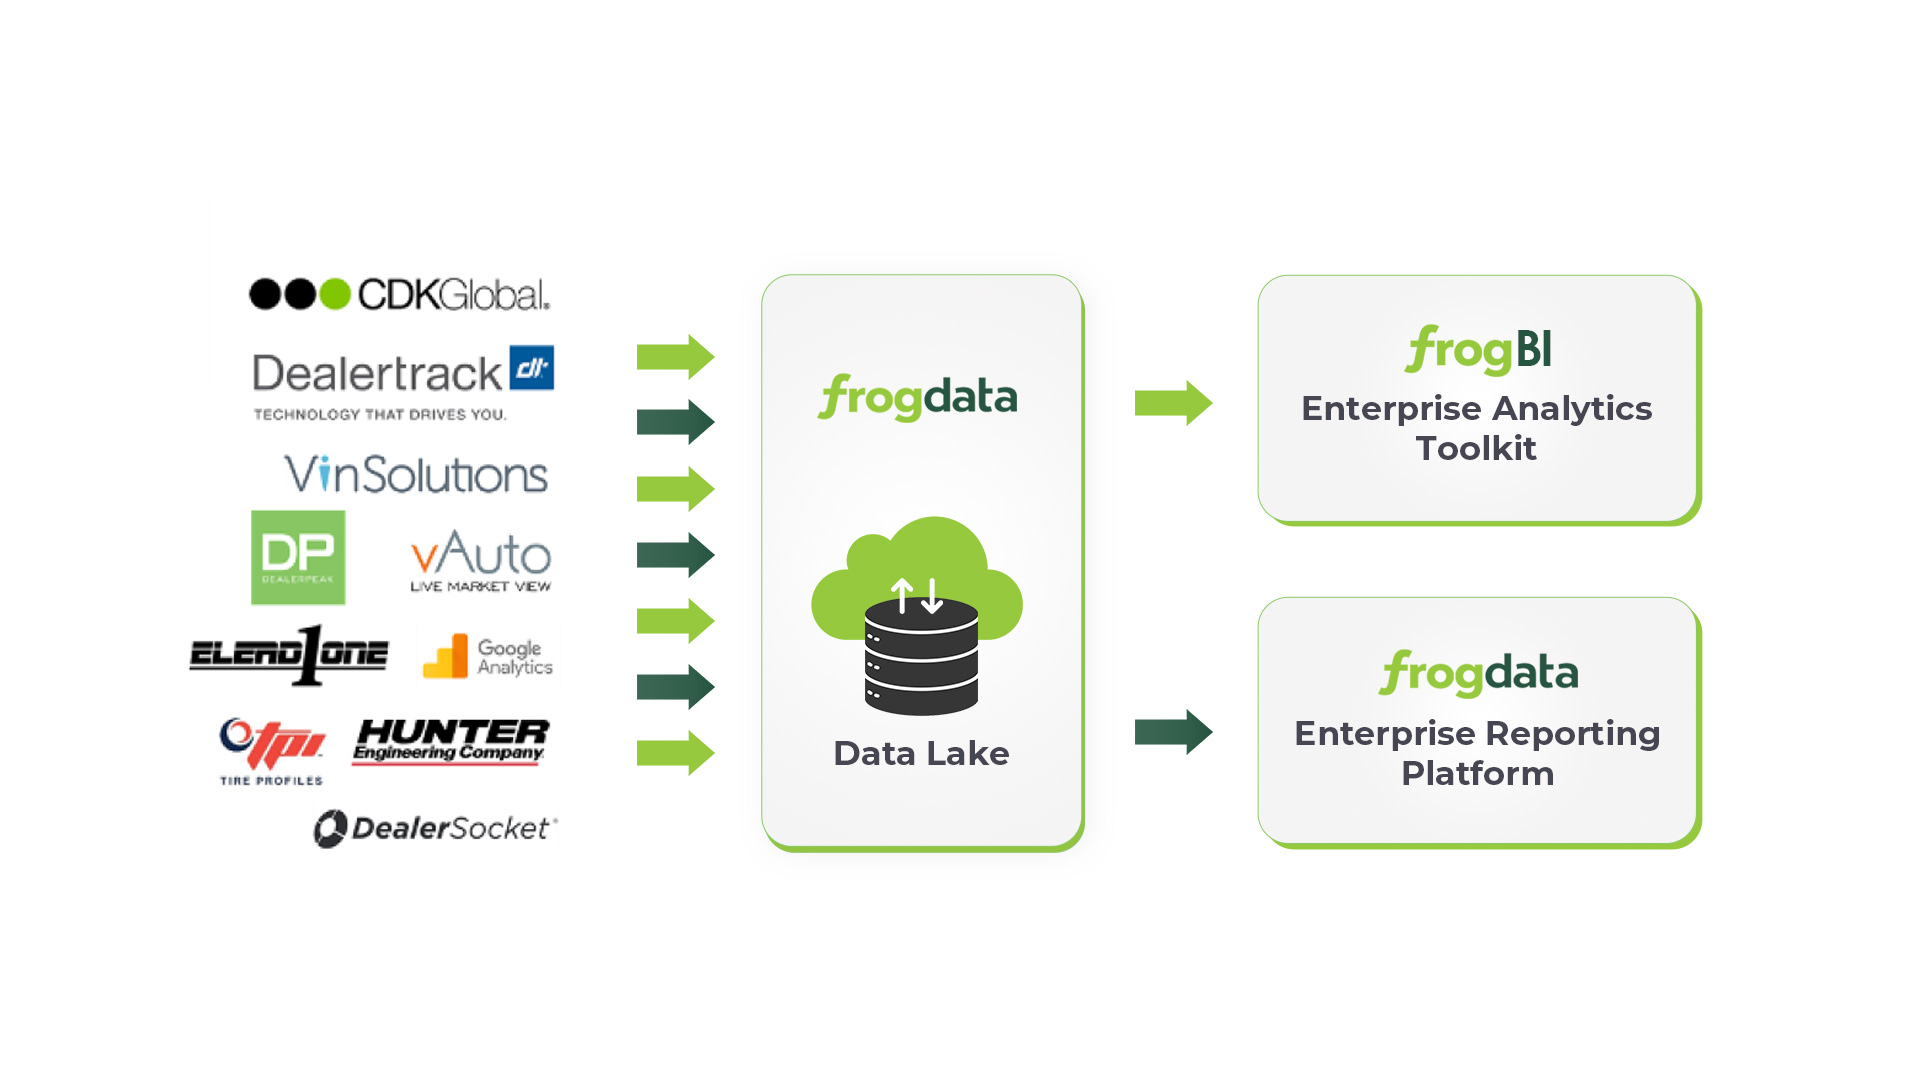 FrogBI Flow Chart Graphic